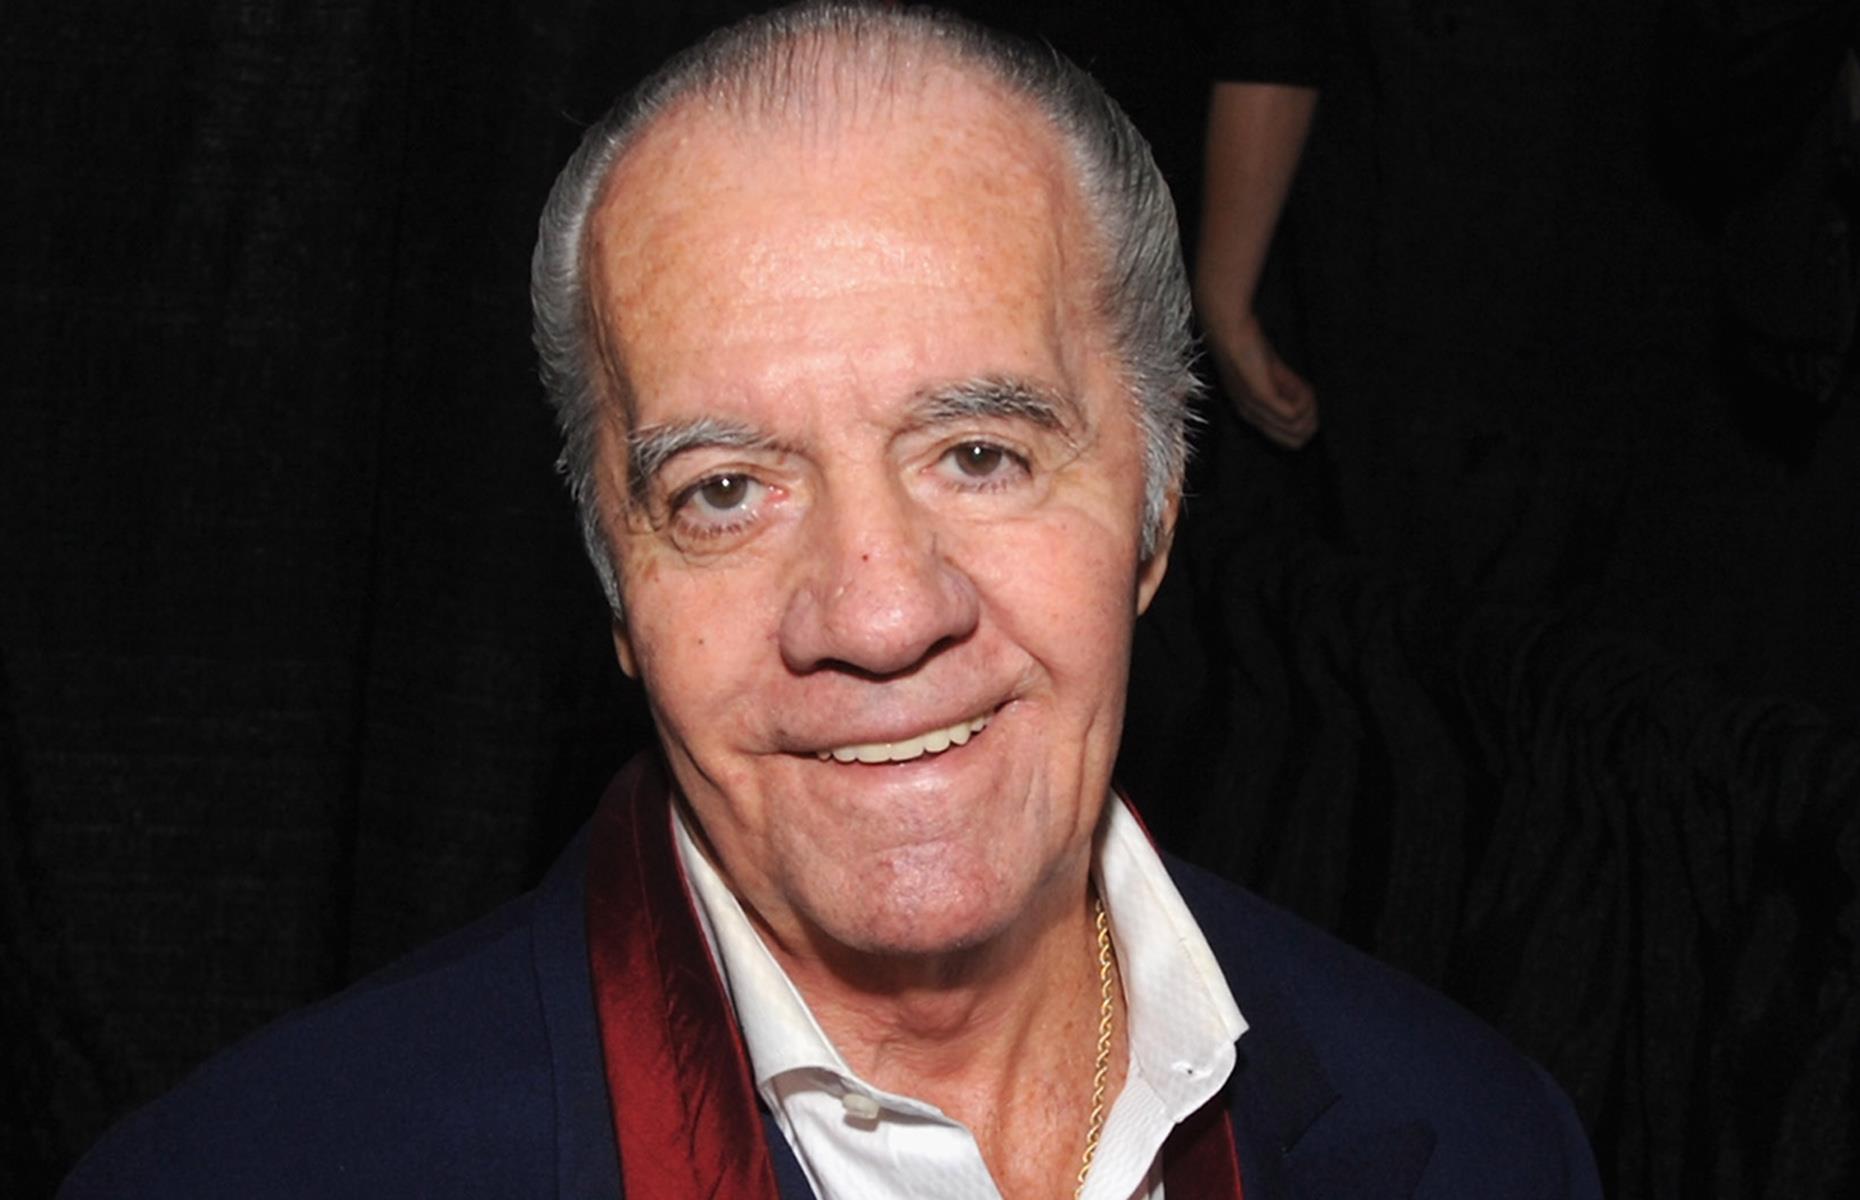 <p>After <em>The Sopranos</em> wrapped, Sirico appeared in movies including Woody Allen's<em> Café Society</em> and the 2018 dramedy <em>Sarah Q.</em></p>  <p>He also had a recurrent vocal role in the animated sitcom<em> Family Guy</em>, playing Vinnie the dog between 2013 and 2016.</p>  <p>His last ever performance was in the 2022 crime flick <em>Respect the Jux.</em></p>  <p>Sirico passed away in July 2022, aged 79. His estimated net worth at the time of his death was a cool $8 million (£6m).</p>